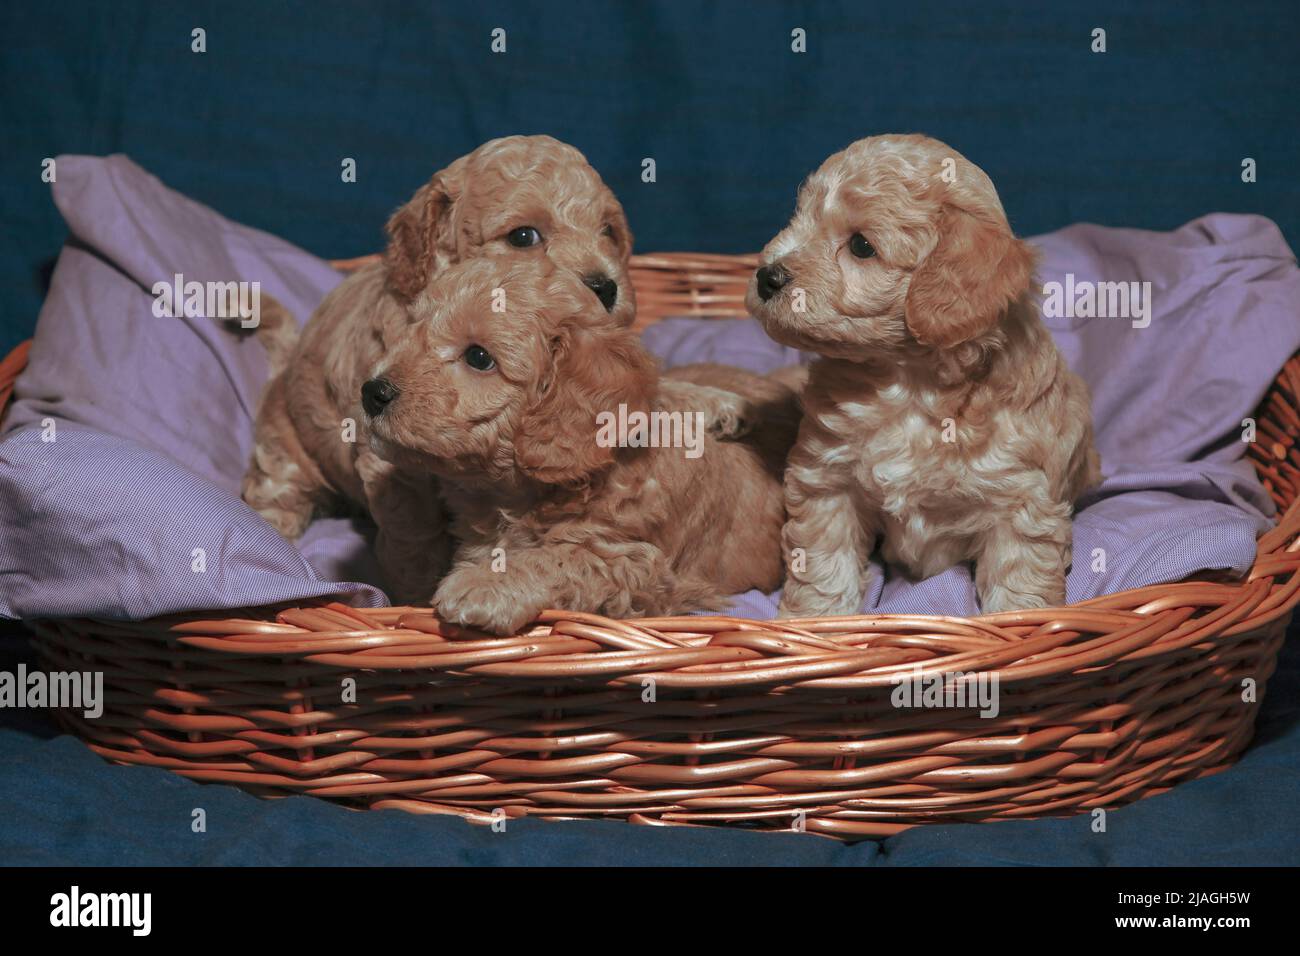 Five-week-old Poochon (Poodle & Bichon mix) puppies posing in a basket Stock Photo